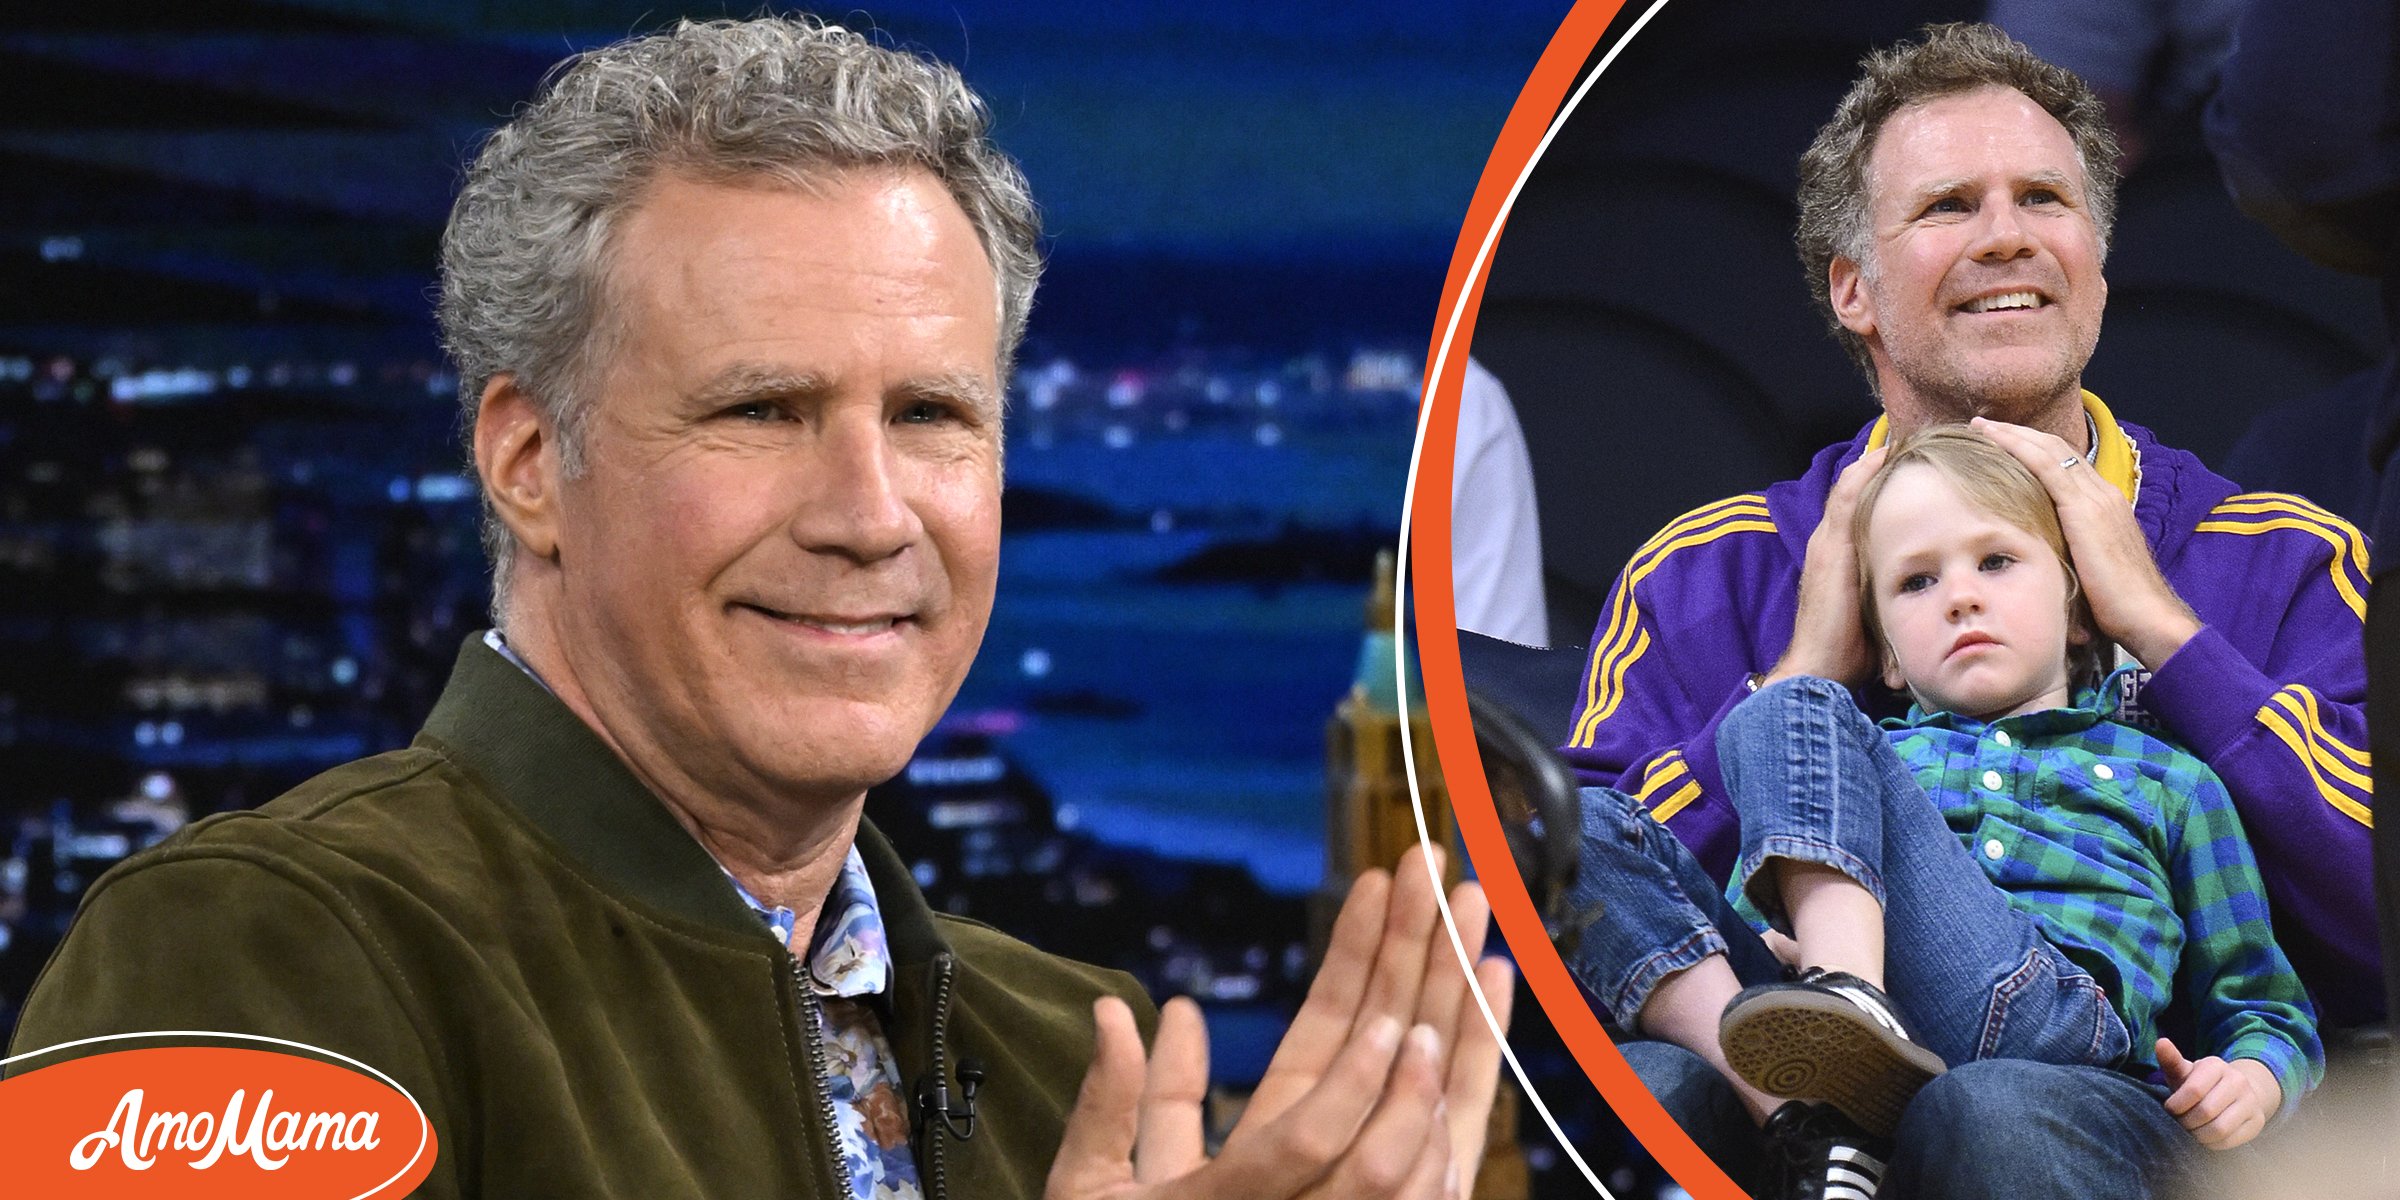 Axel Ferrell Is Will Ferrell's Youngest Son Facts about Him